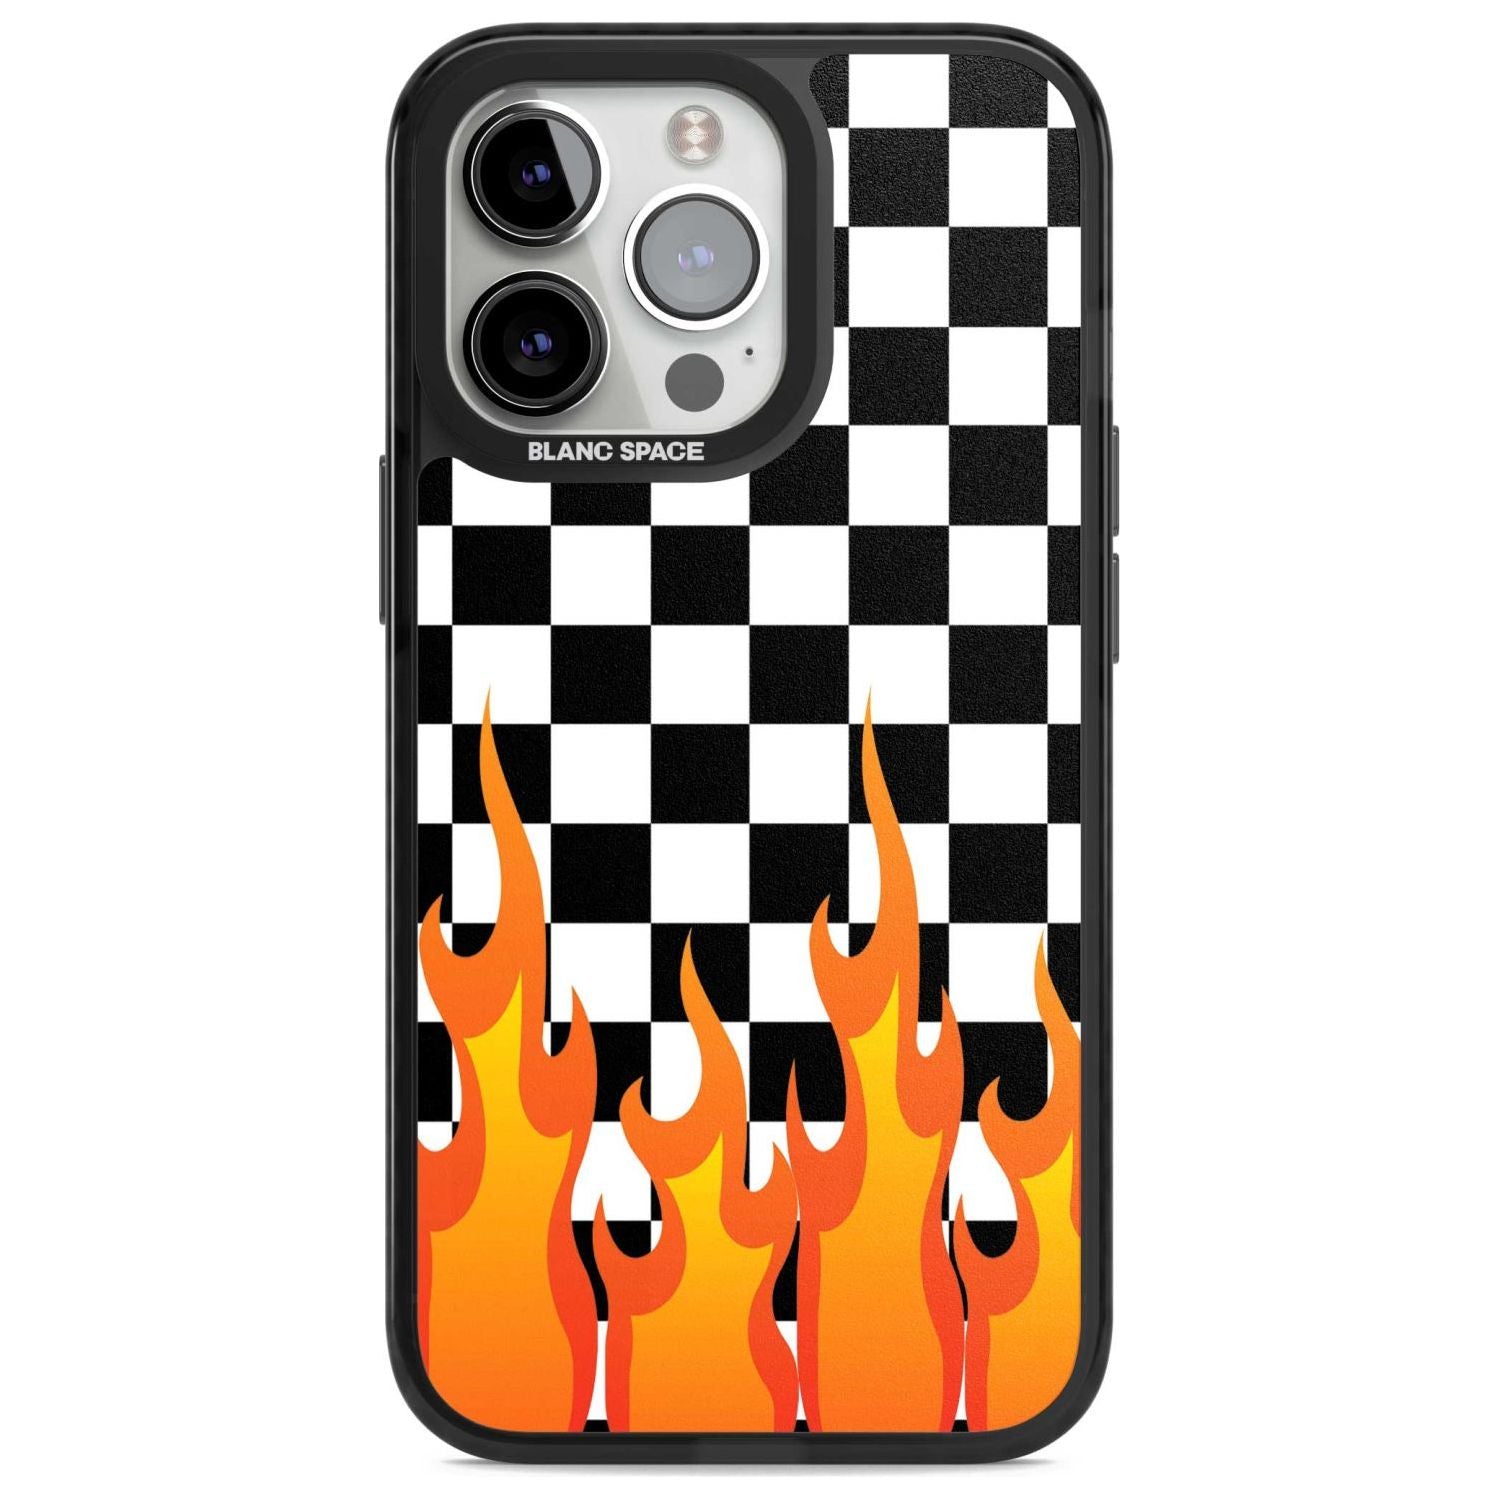 Checkered Fire Phone Case iPhone 15 Pro Max / Magsafe Black Impact Case,iPhone 15 Pro / Magsafe Black Impact Case,iPhone 14 Pro Max / Magsafe Black Impact Case,iPhone 14 Pro / Magsafe Black Impact Case,iPhone 13 Pro / Magsafe Black Impact Case Blanc Space